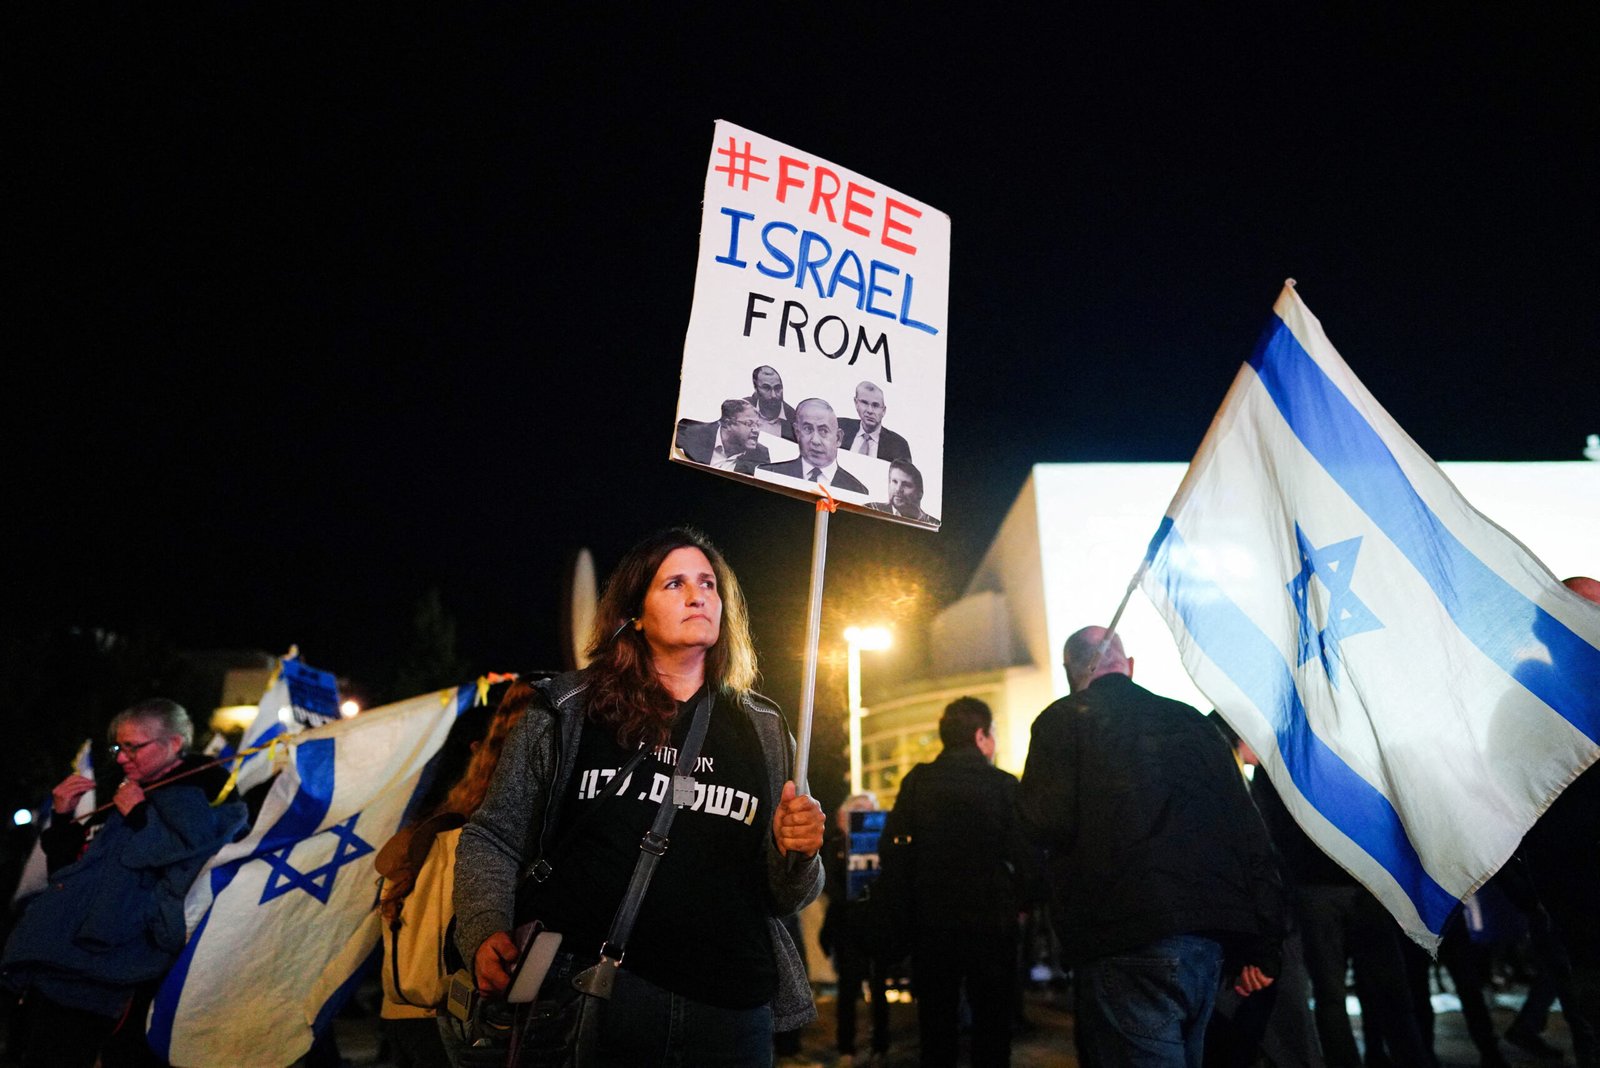 Face Of Evil Israeli Protesters Call For Early Polls To Oust PM Netanyahu